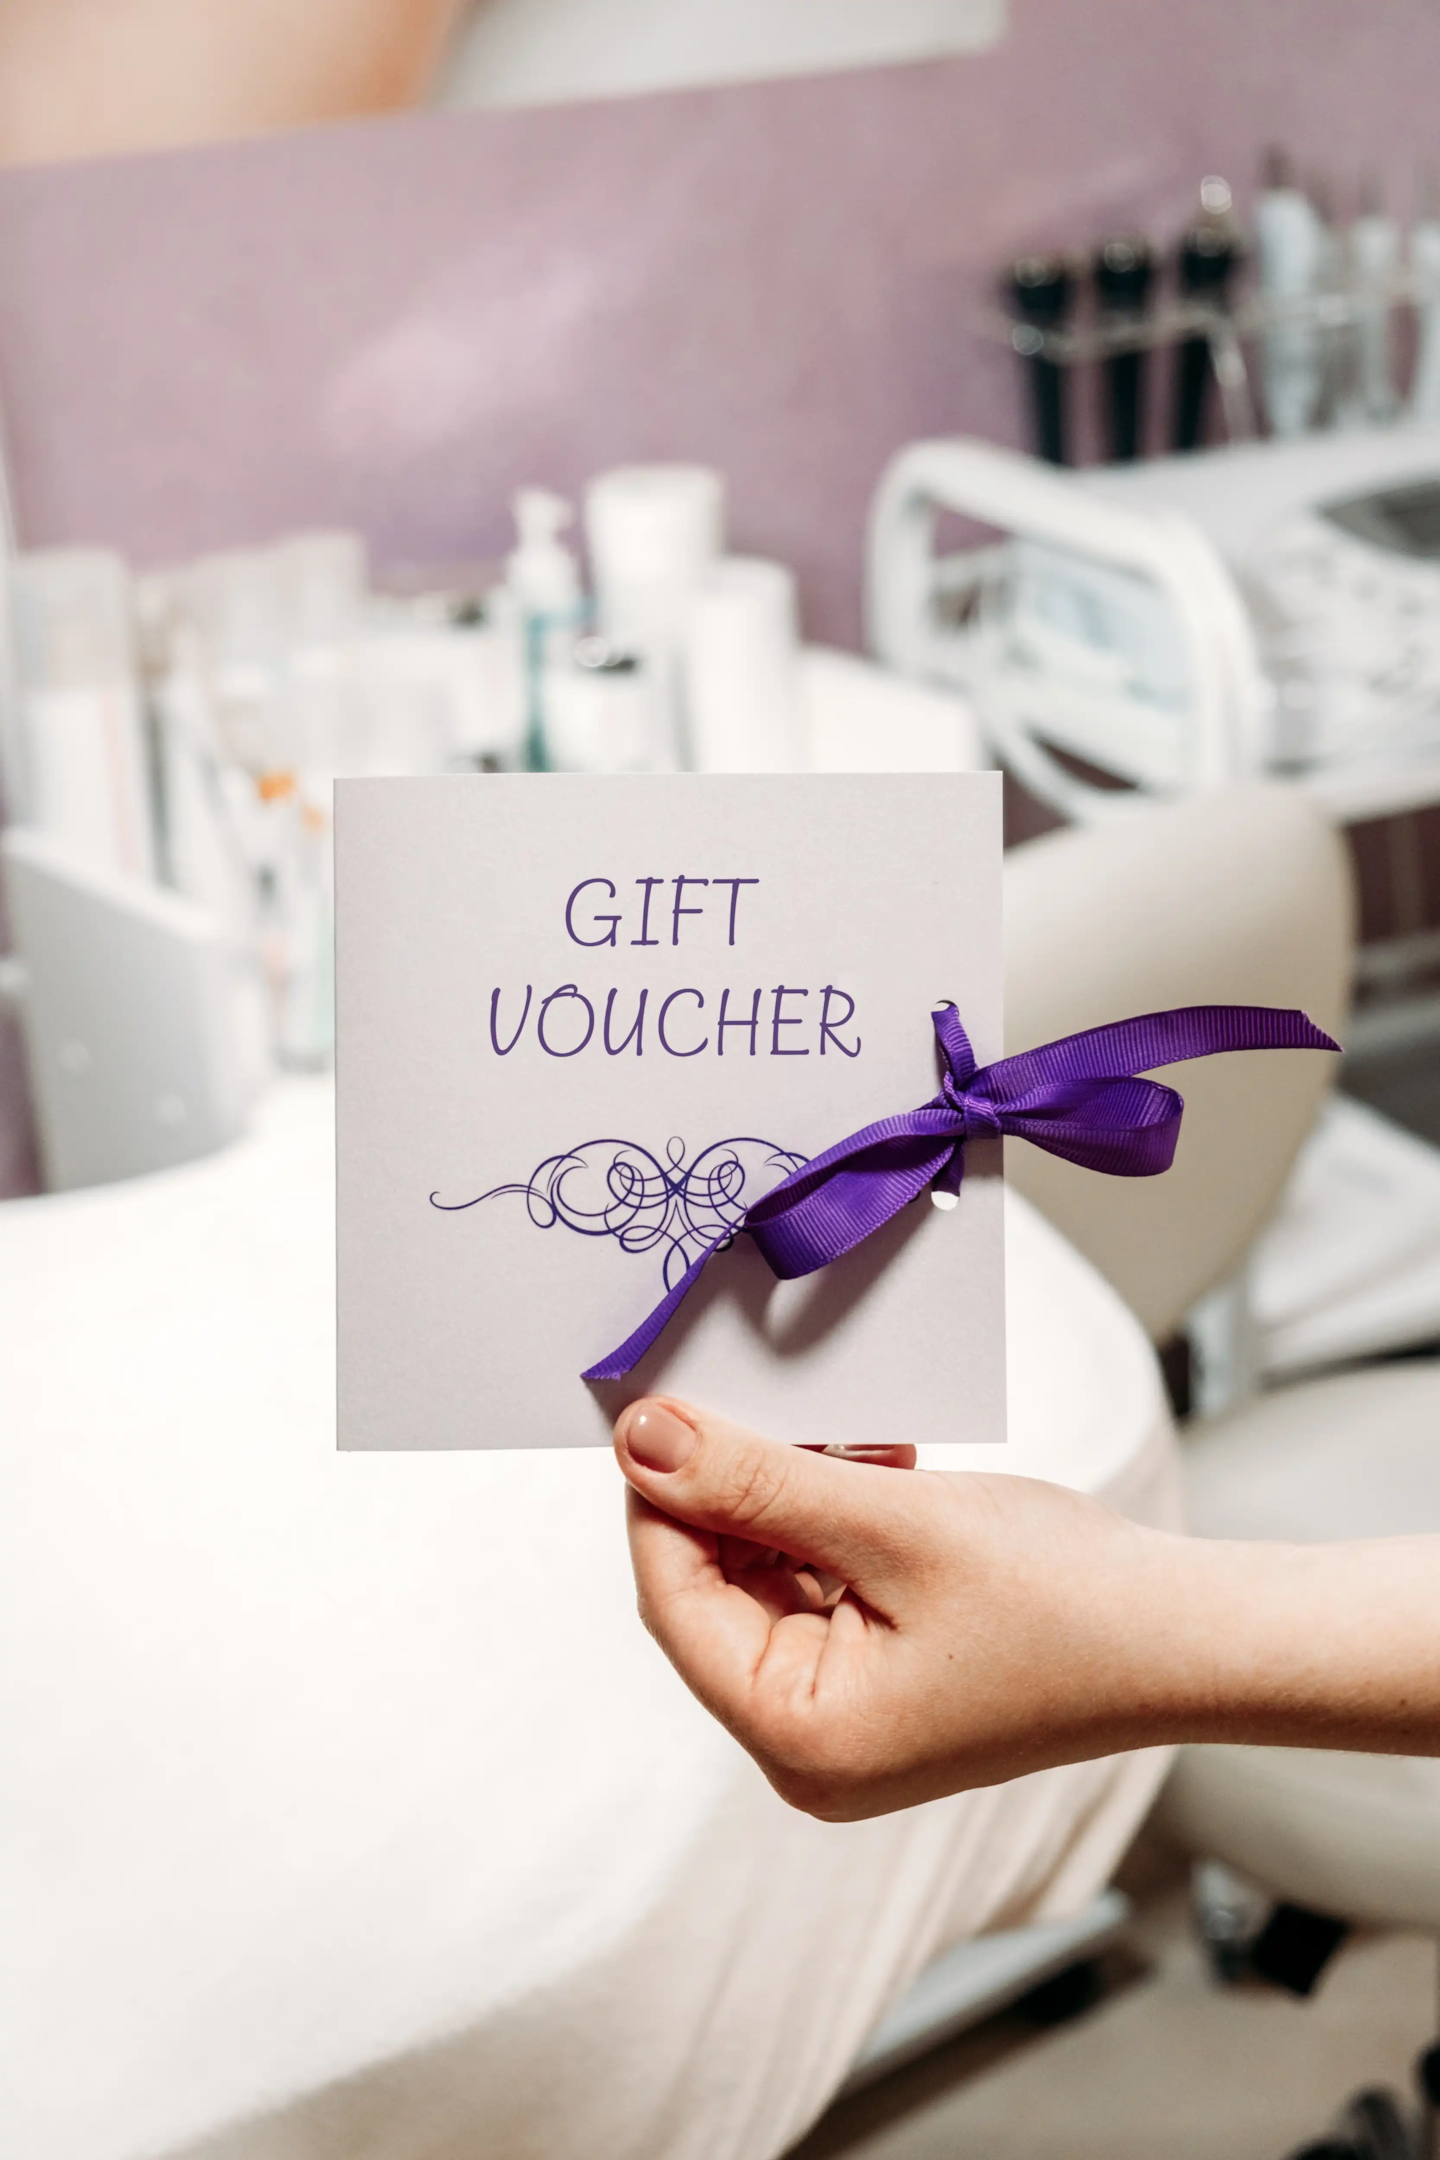 Nourished special gift voucher businesses